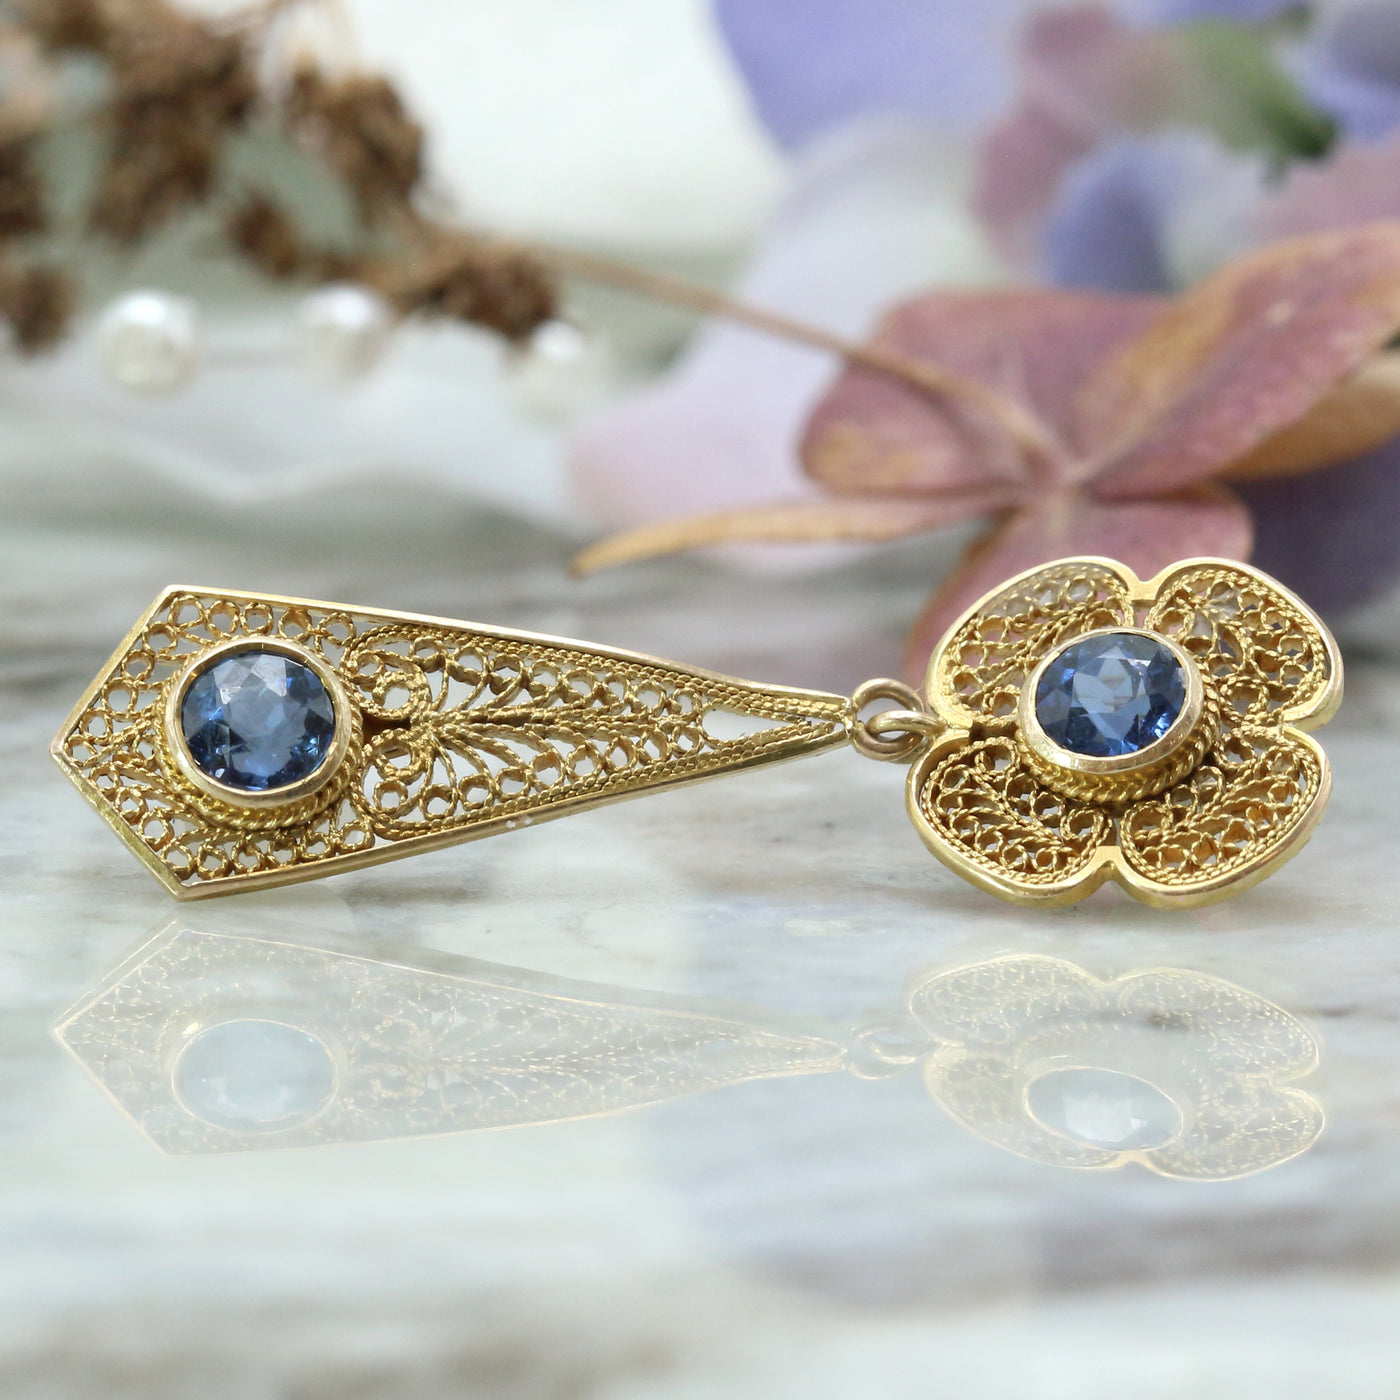 Filigree and Sapphires